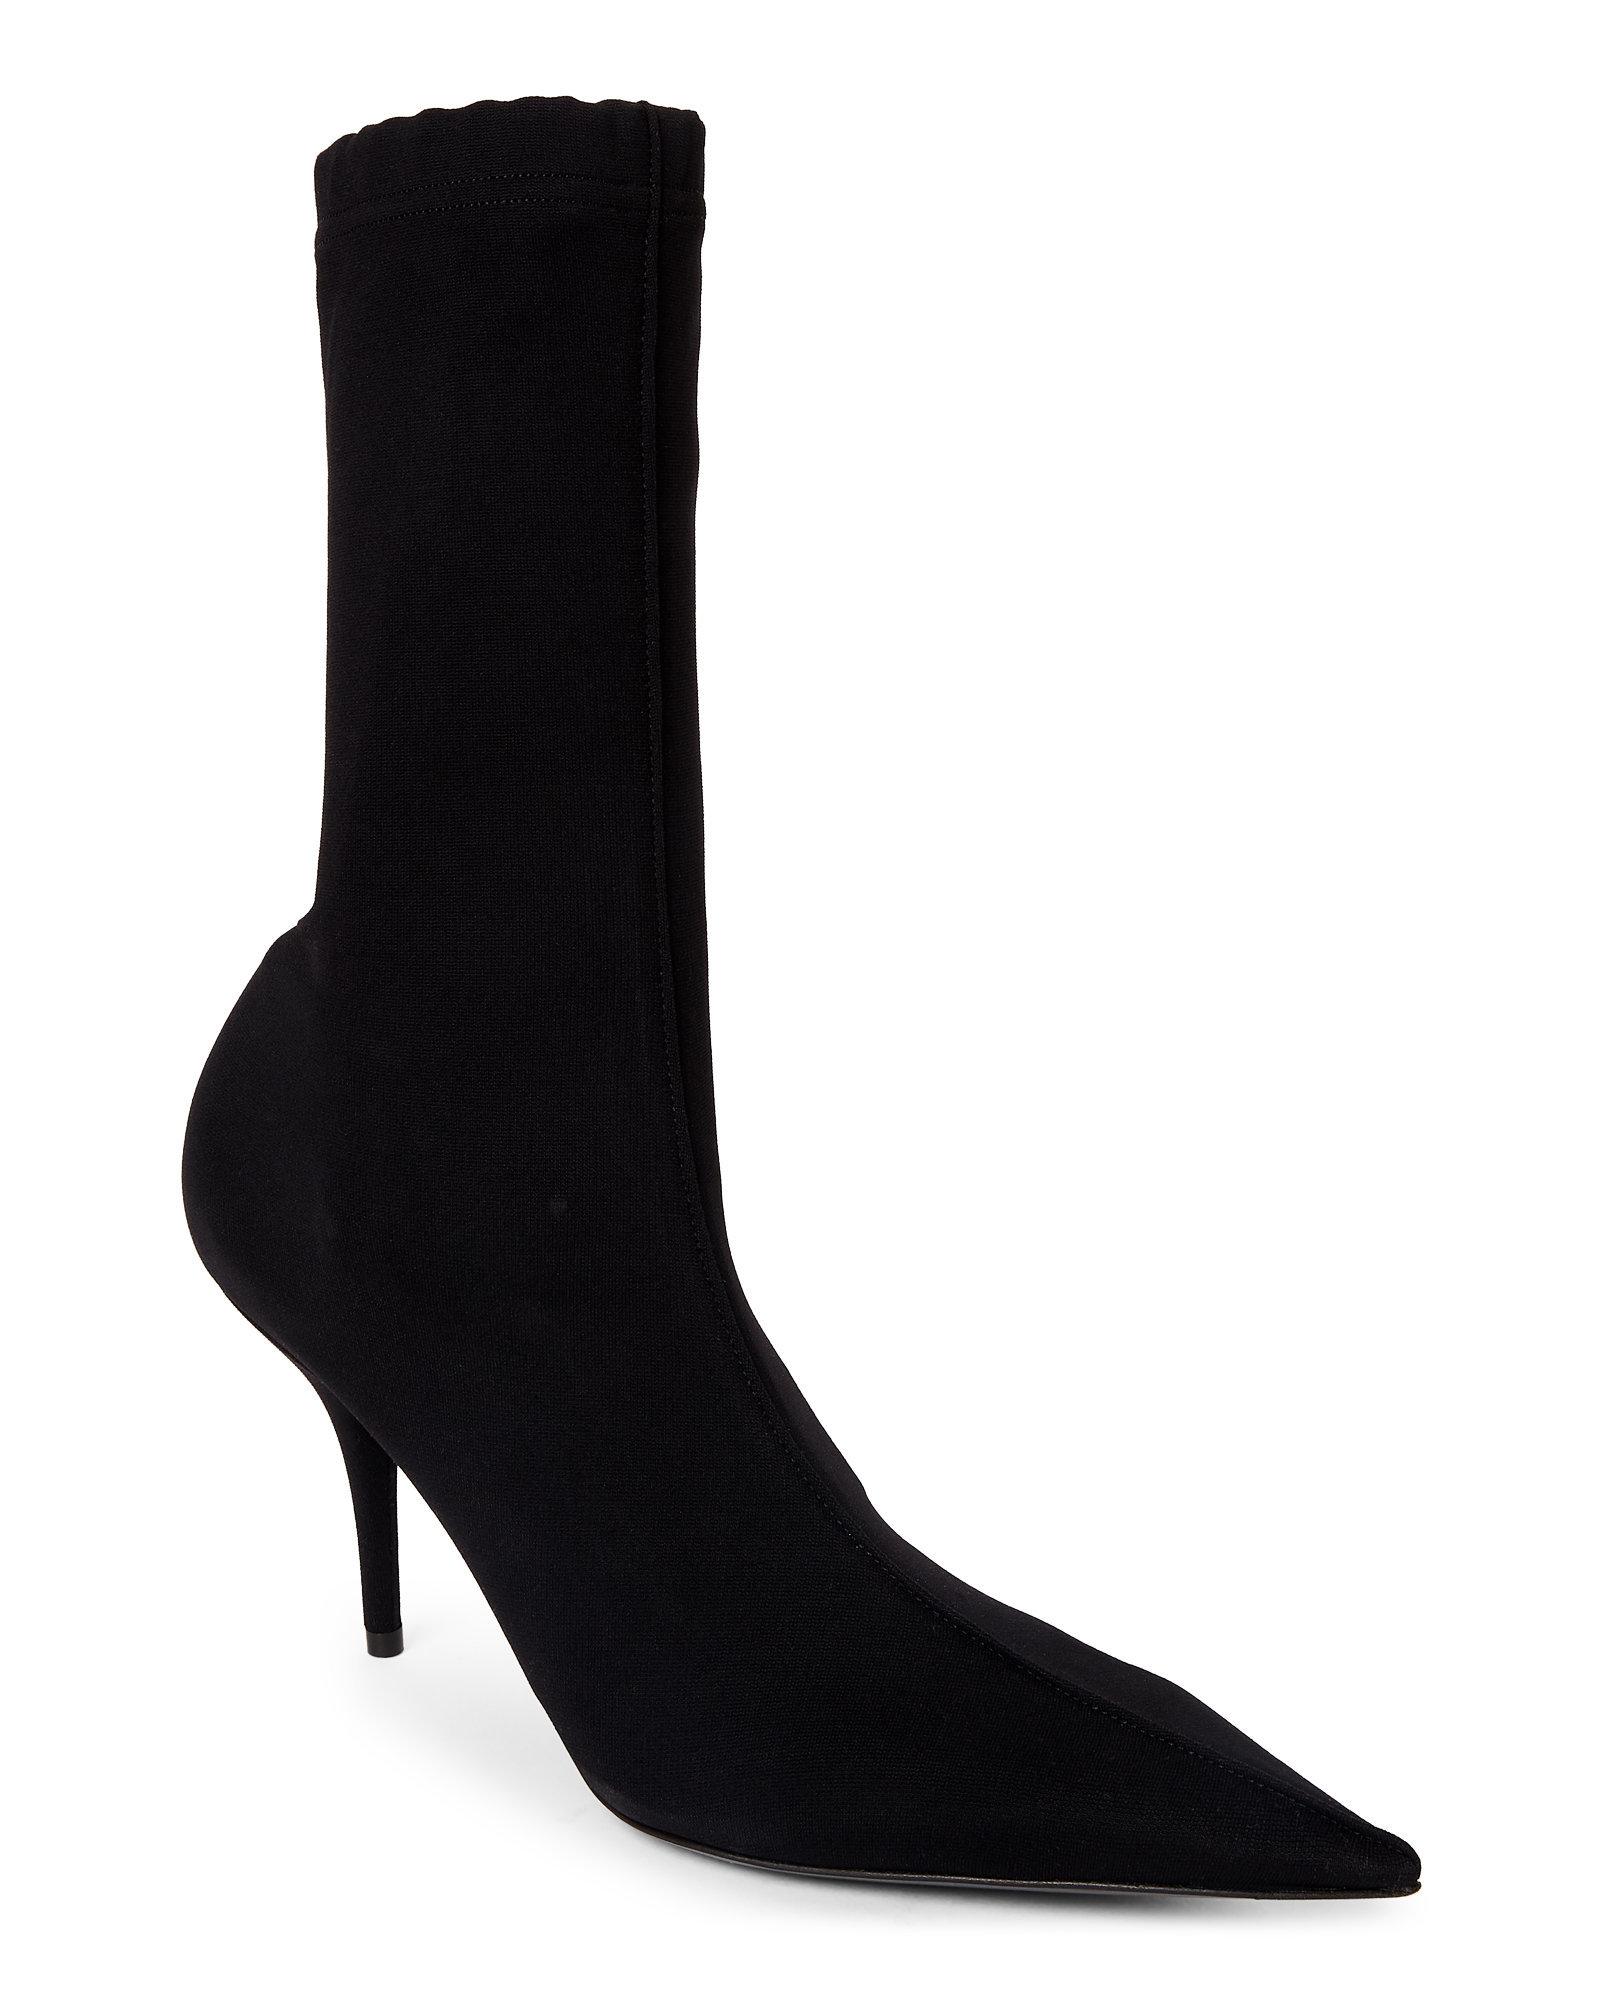 Balenciaga Leather Knife Stretch Knit Pointed Toe Booties in Black - Lyst